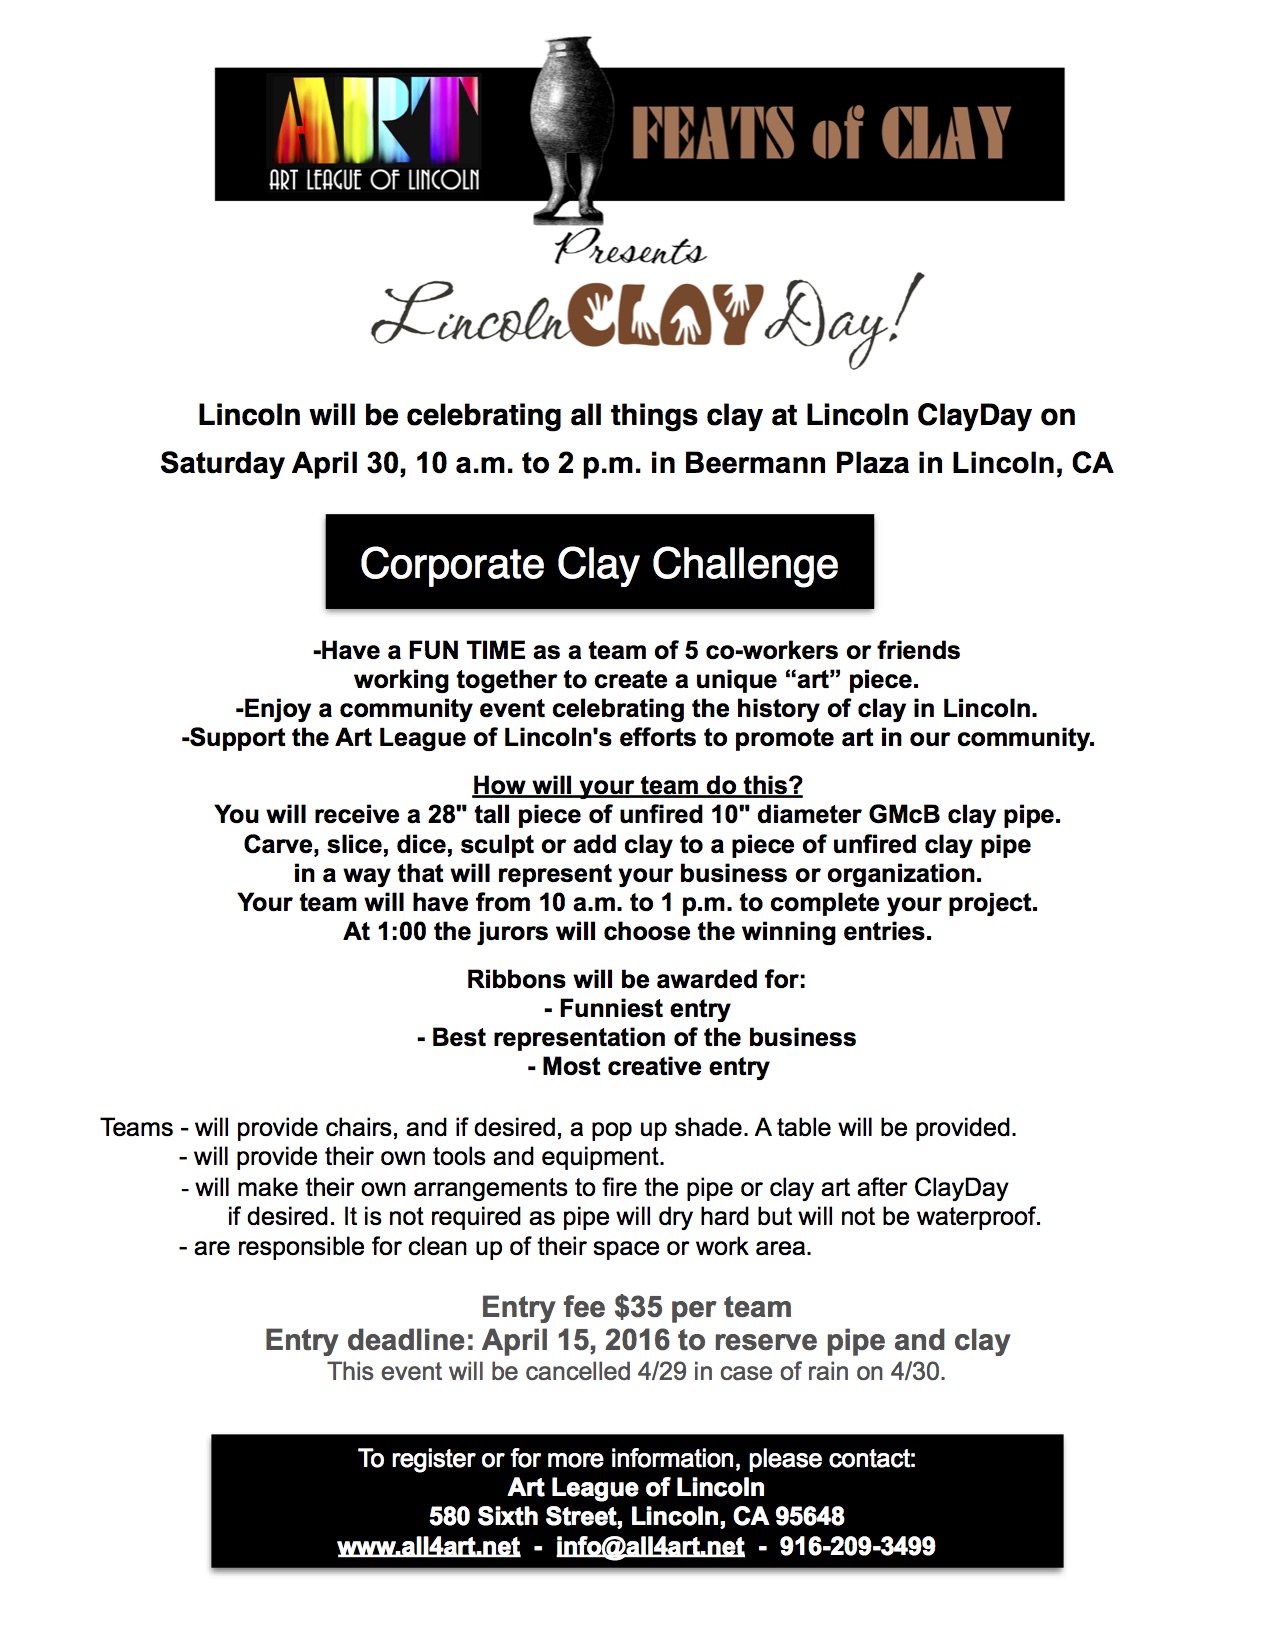 Corporate Clay Challenge